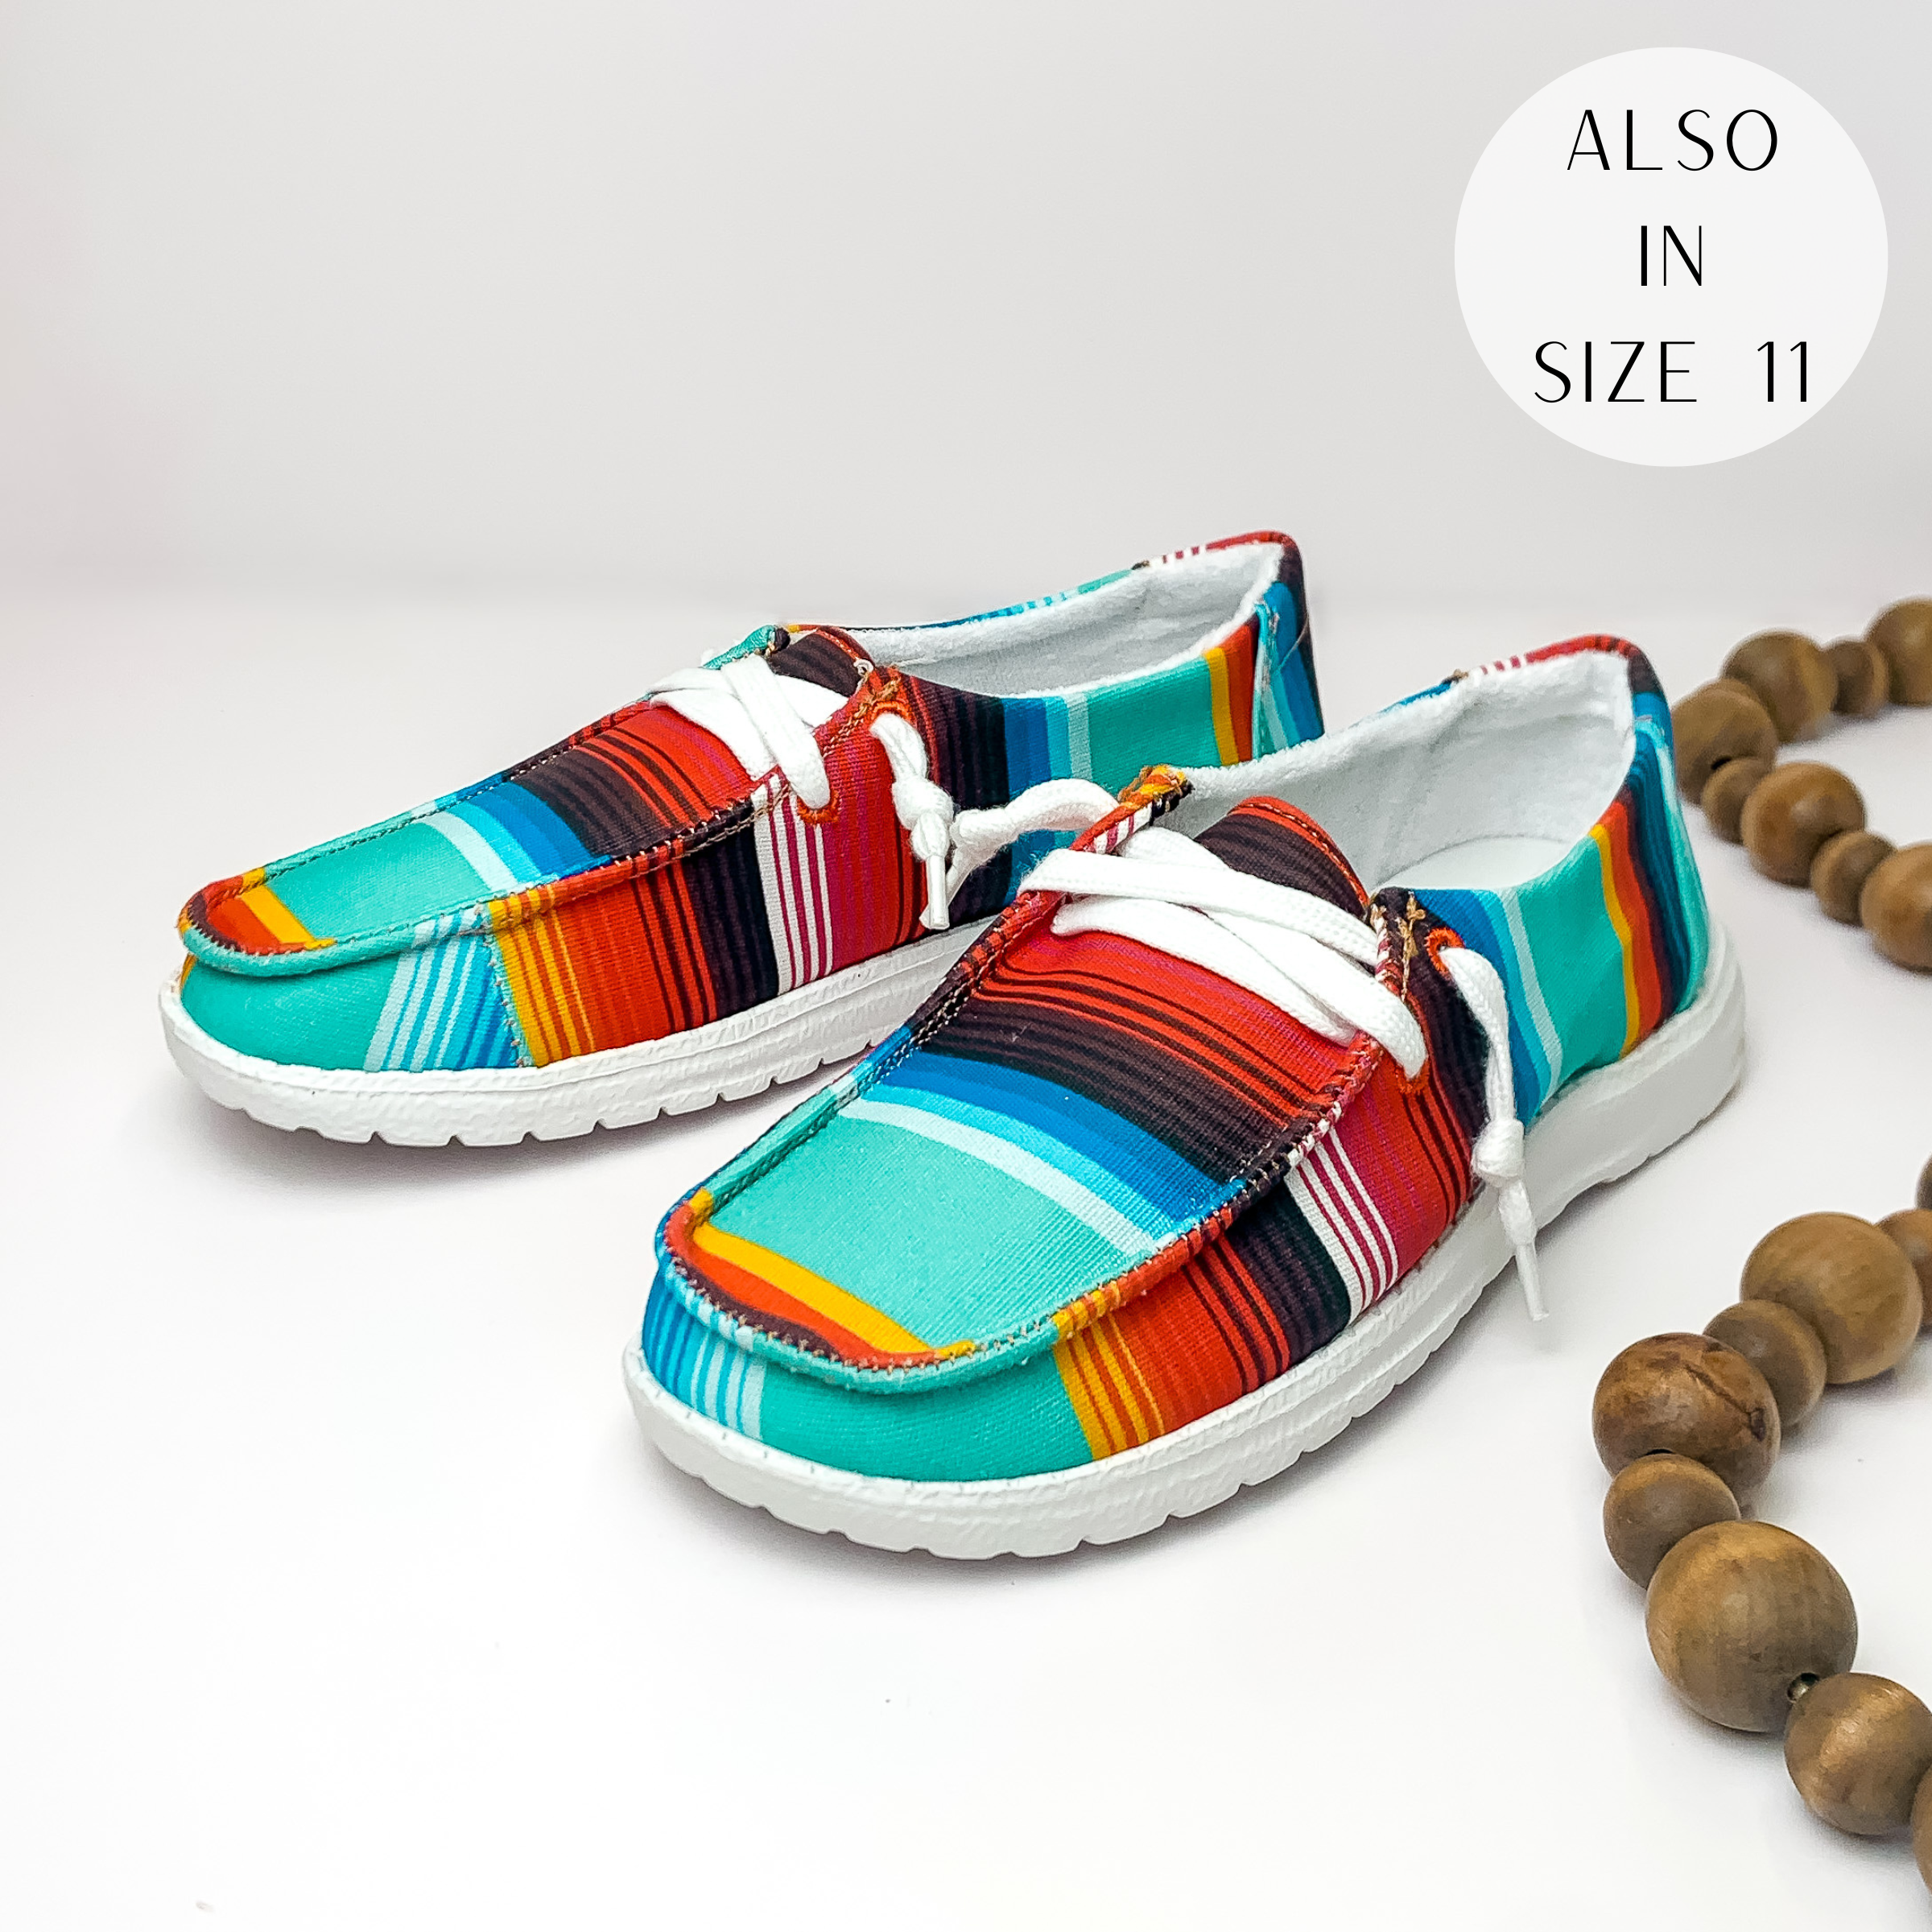 Multicolored serape print shoes with white laces. These shoes are pictured on a white background with brown beads on the right side.